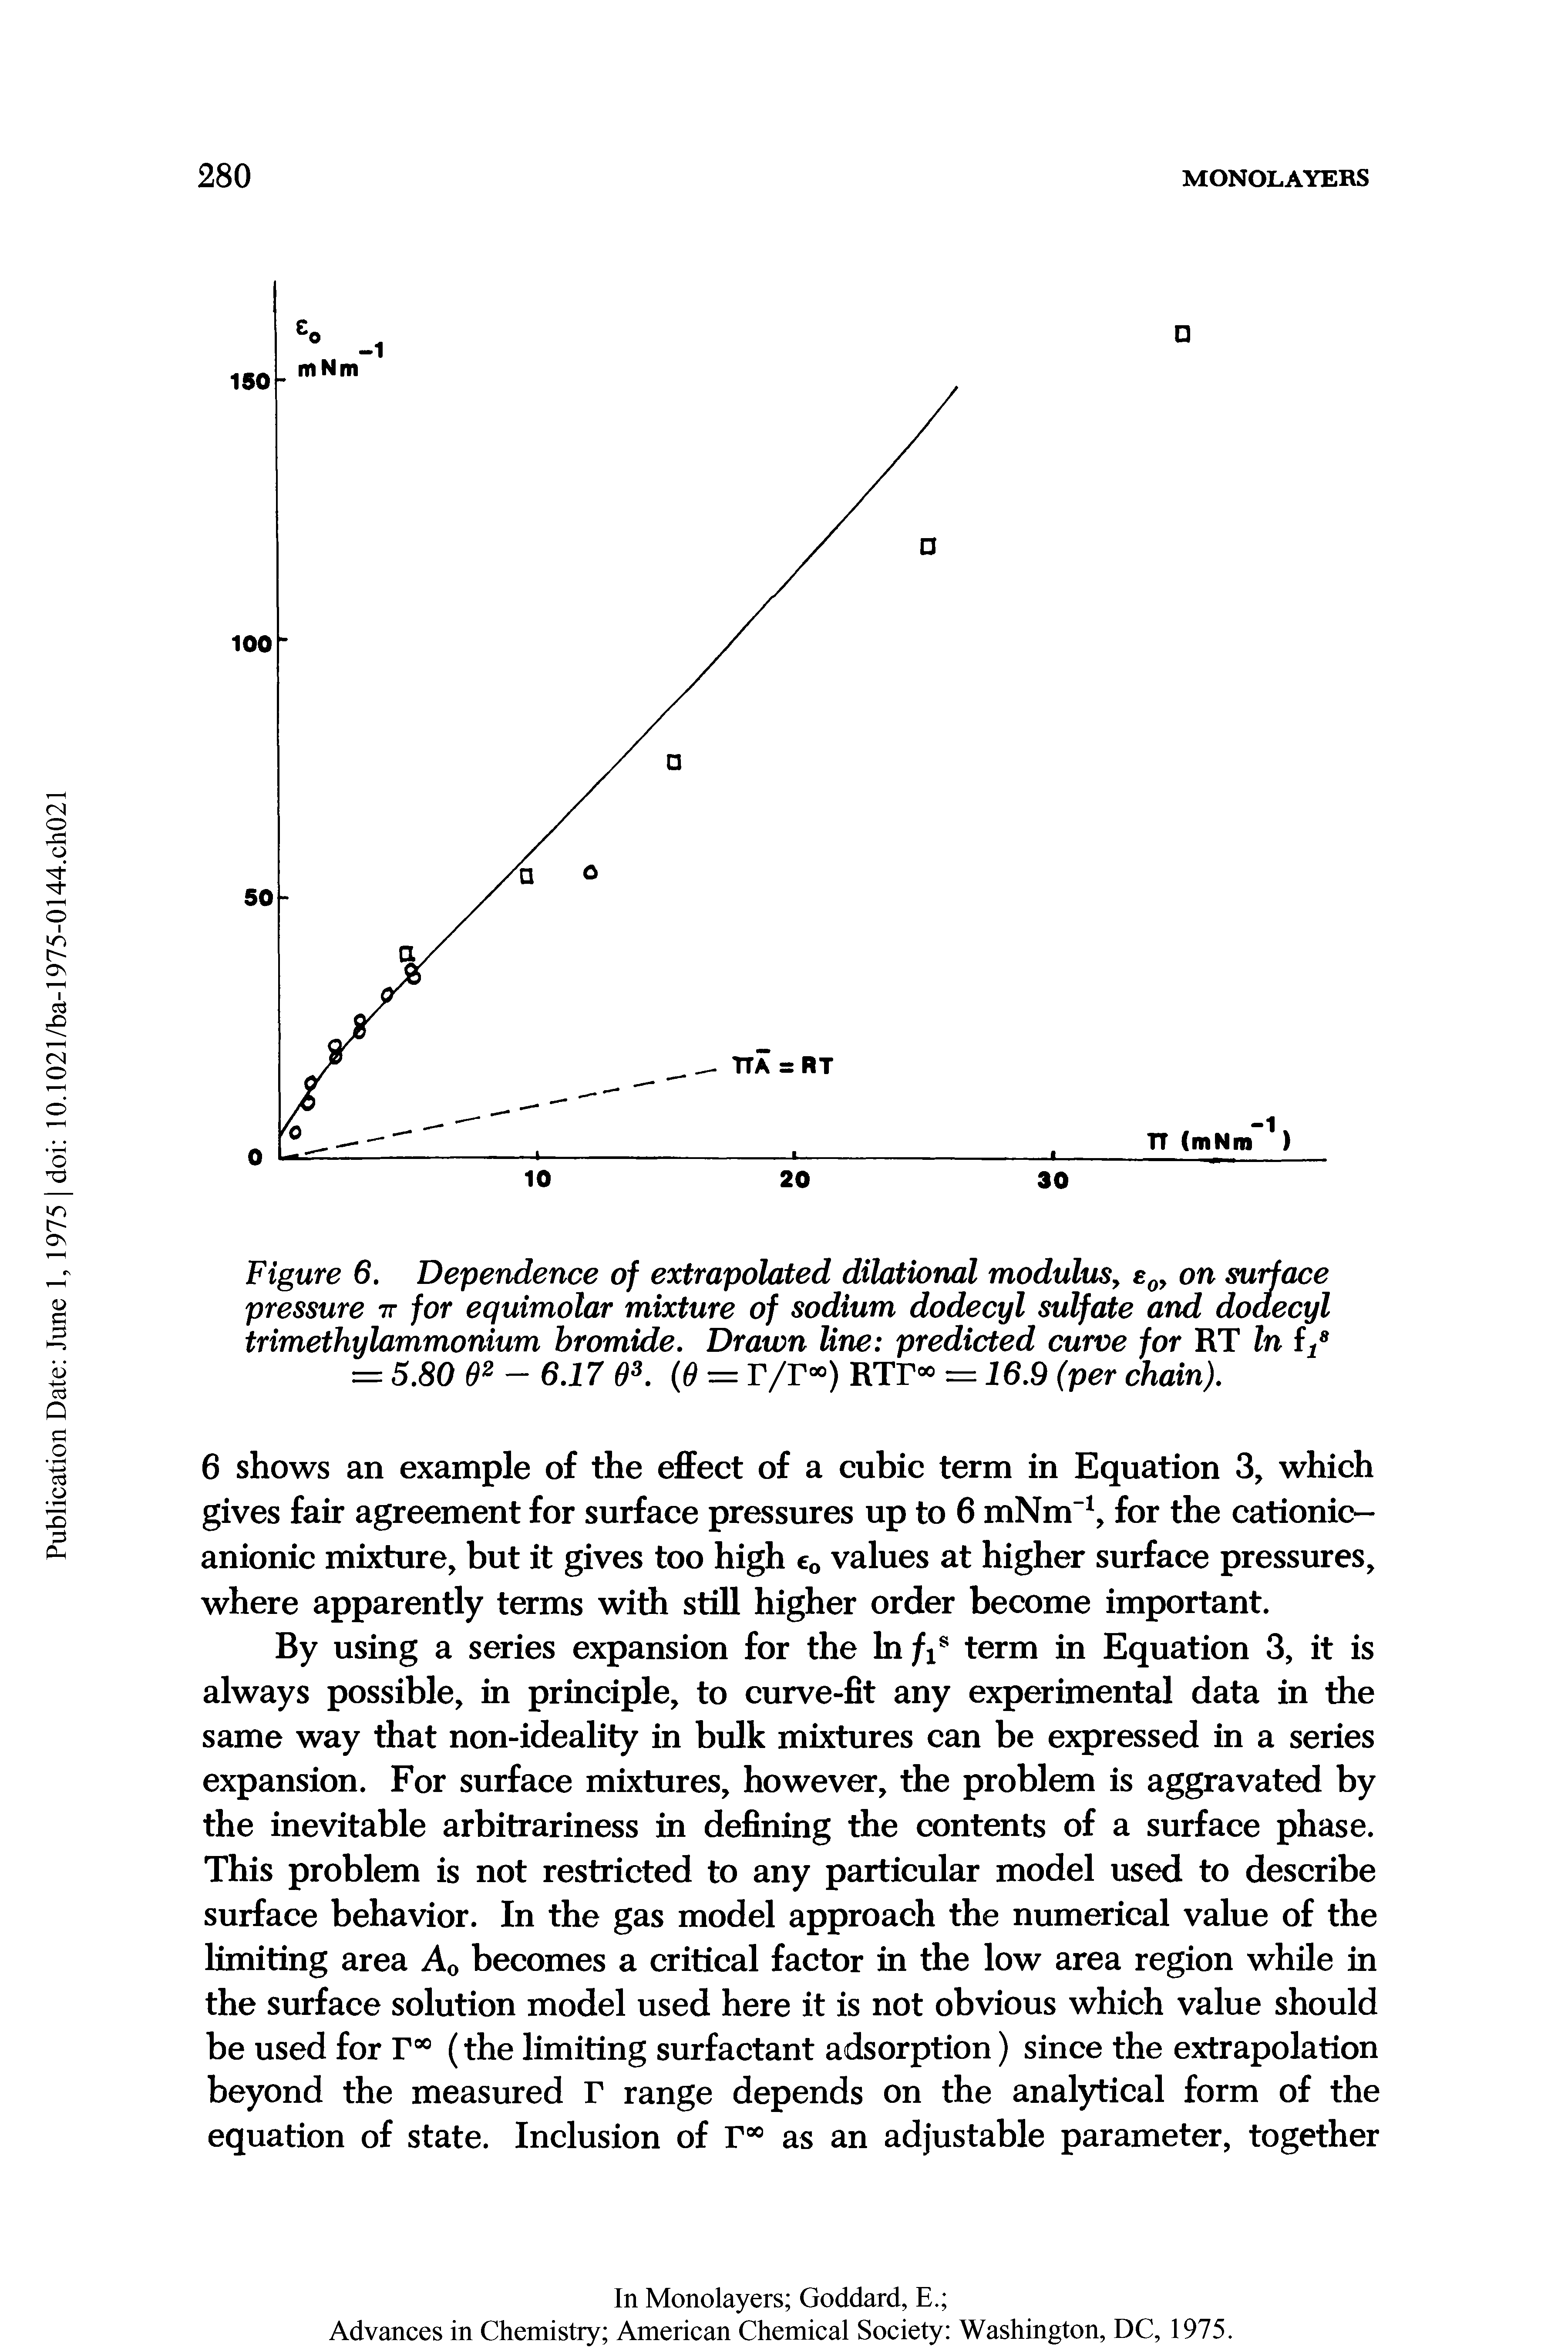 Figure 6. Dependence of extrapolated dilational modulus, e0, on surface pressure tt for equimolar mixture of sodium dodecyl sulfate and dodecyl trimethylammonium bromide. Drawn line predicted curve for RT In f/...